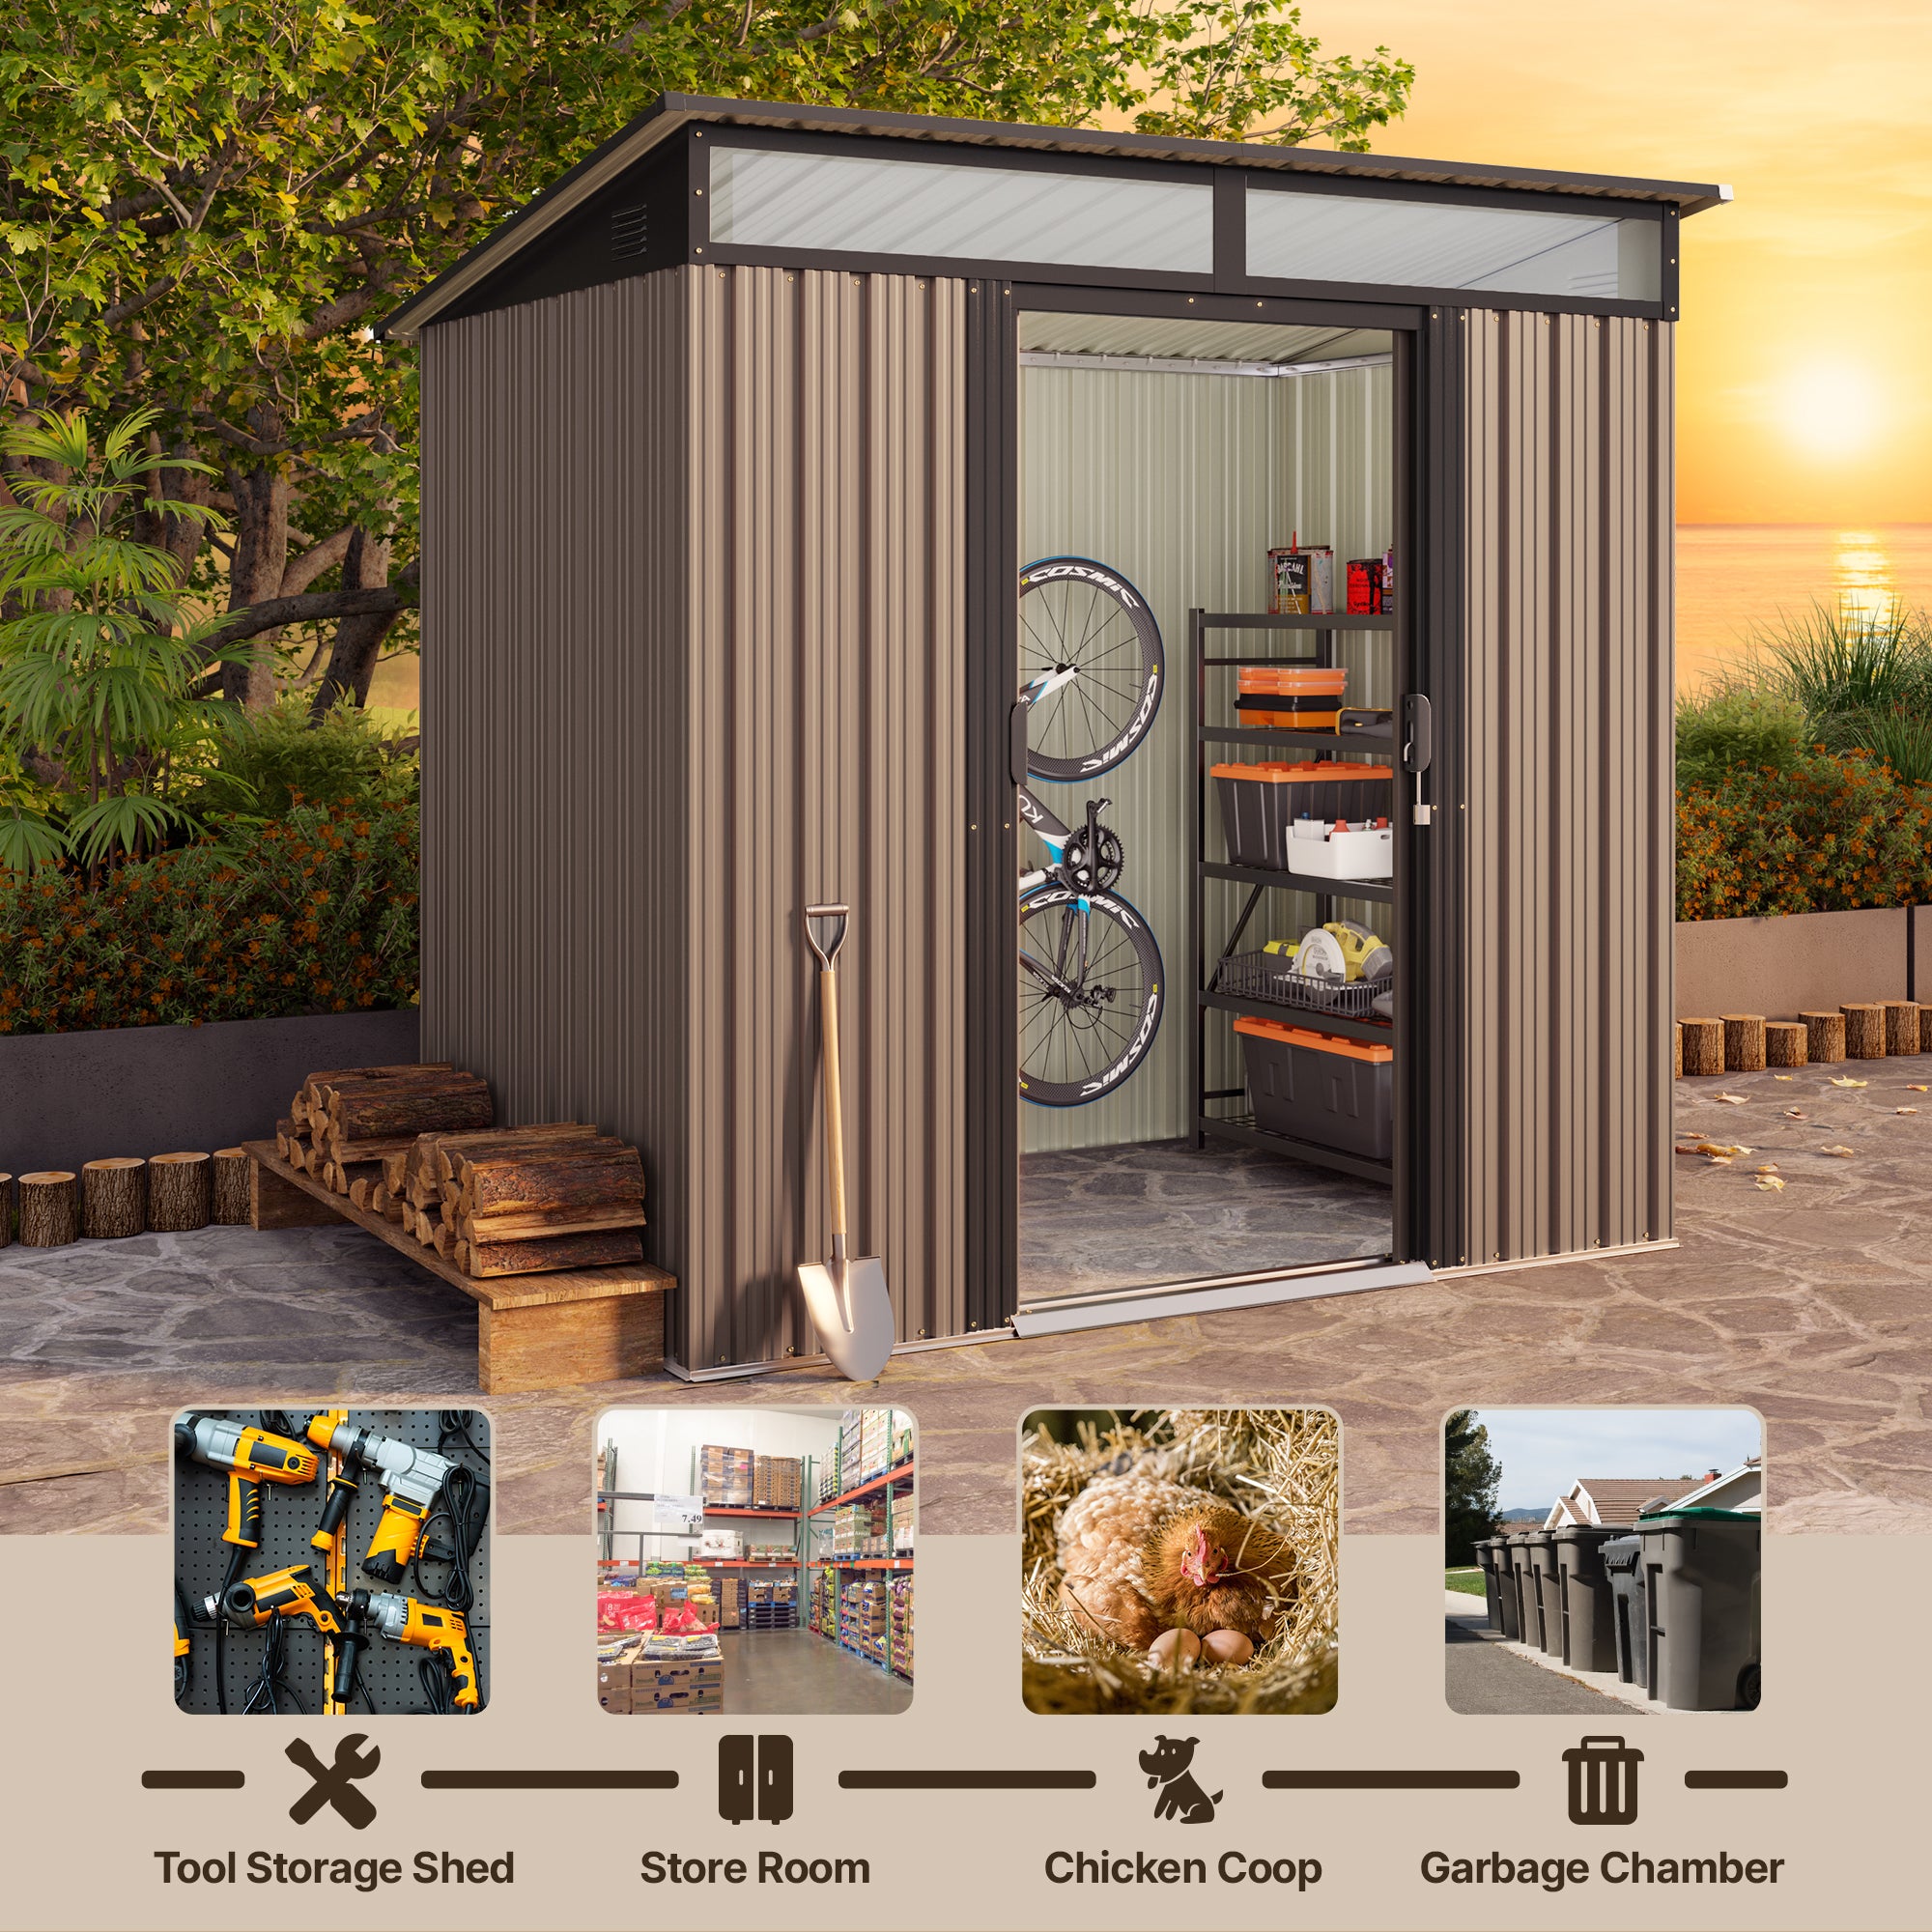 Gizoon CC15 Outdoor Storage Shed with Sliding Doors and Transparent Panel Windows